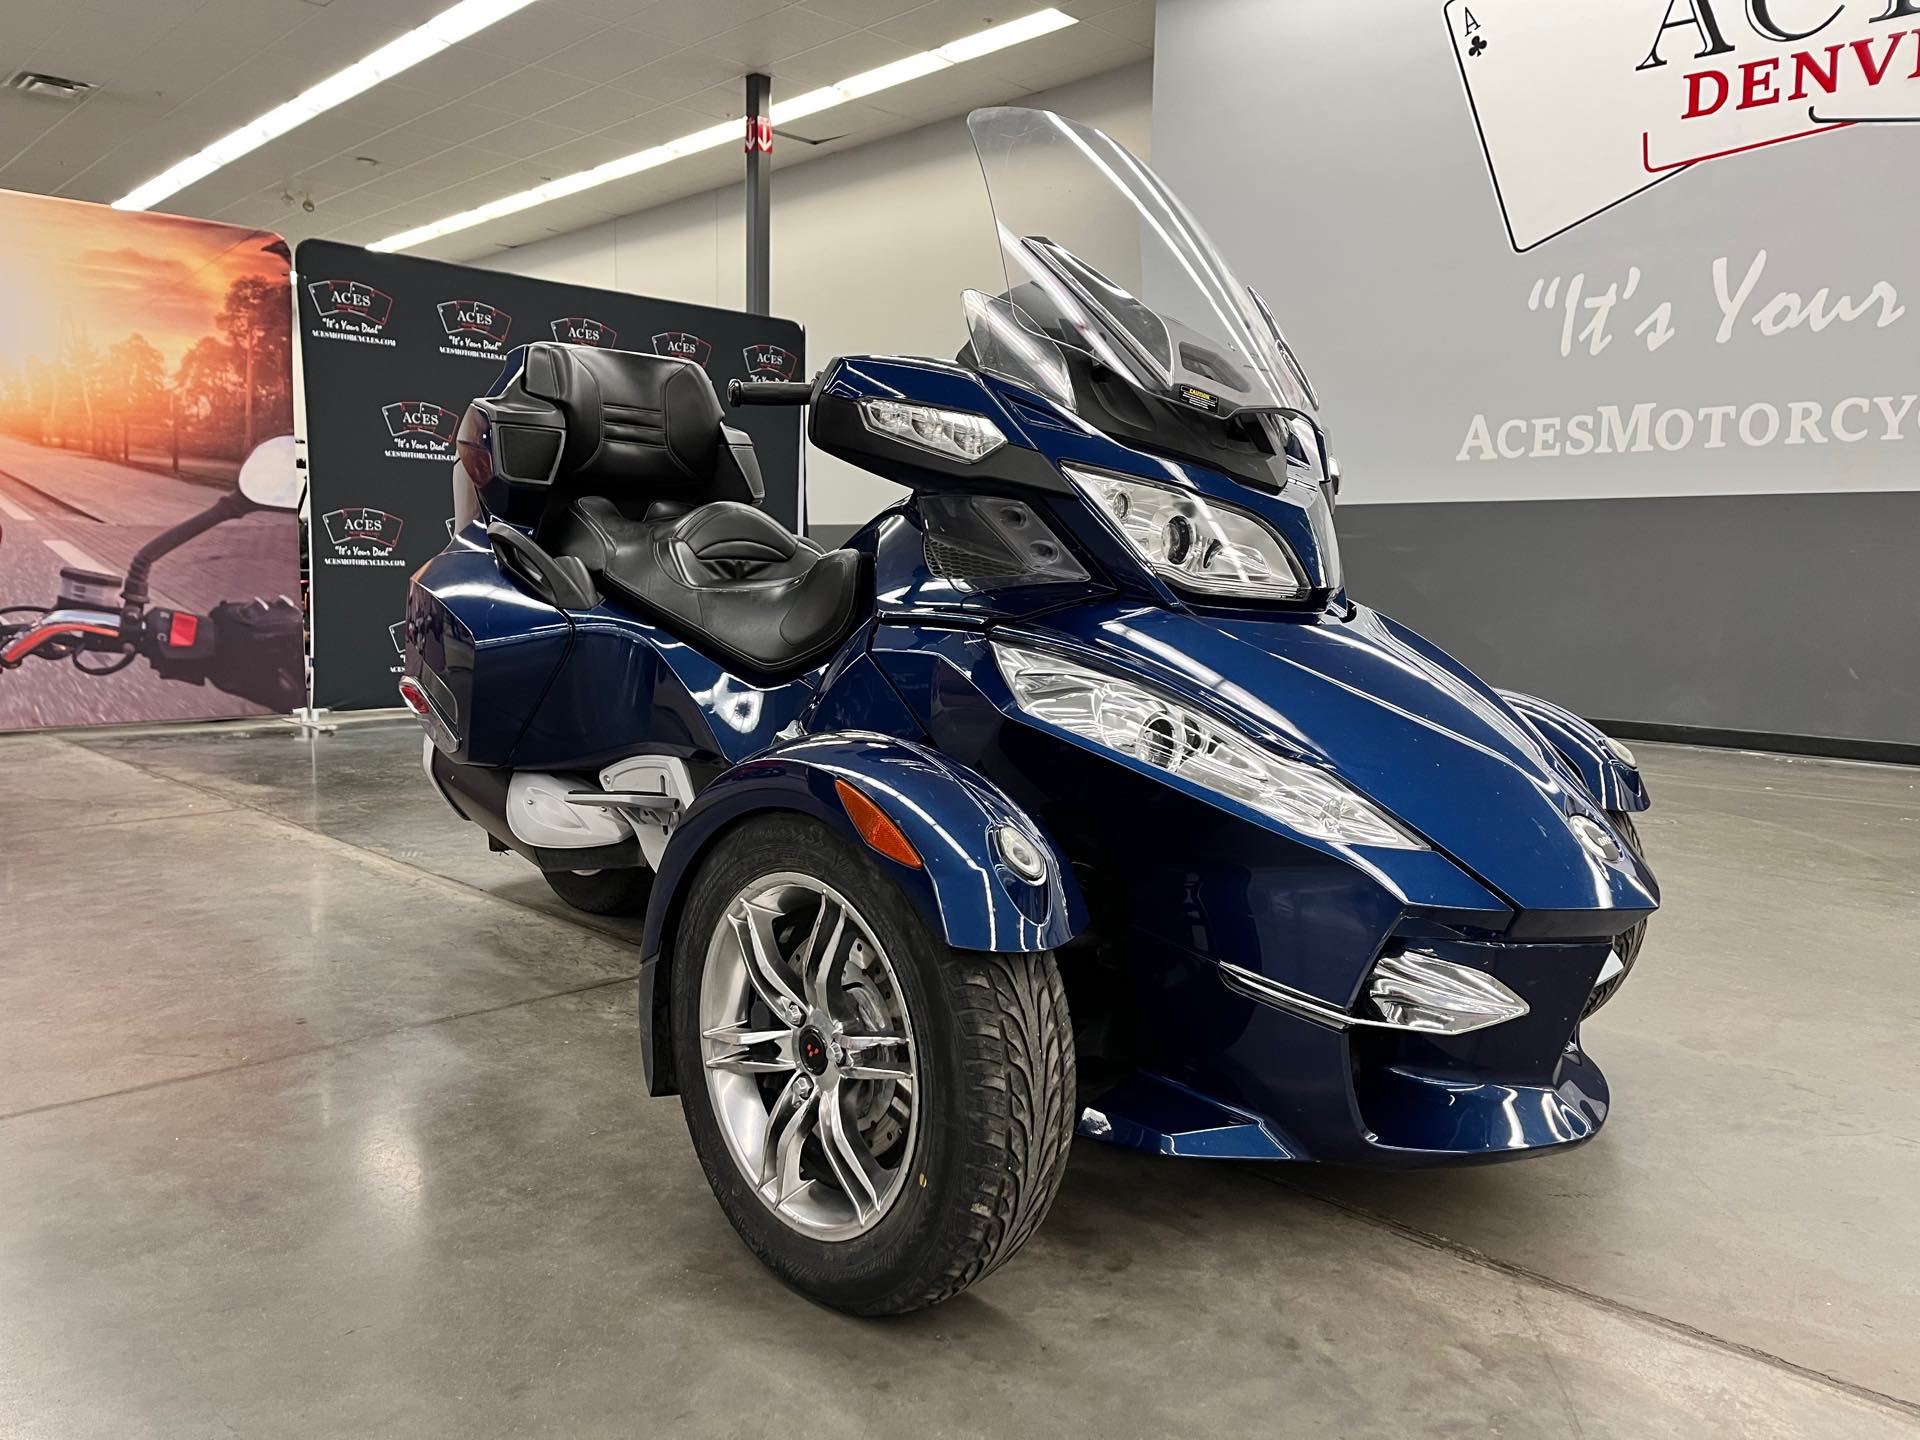 2011 Can-Am Spyder Roadster RT-S at Aces Motorcycles - Denver